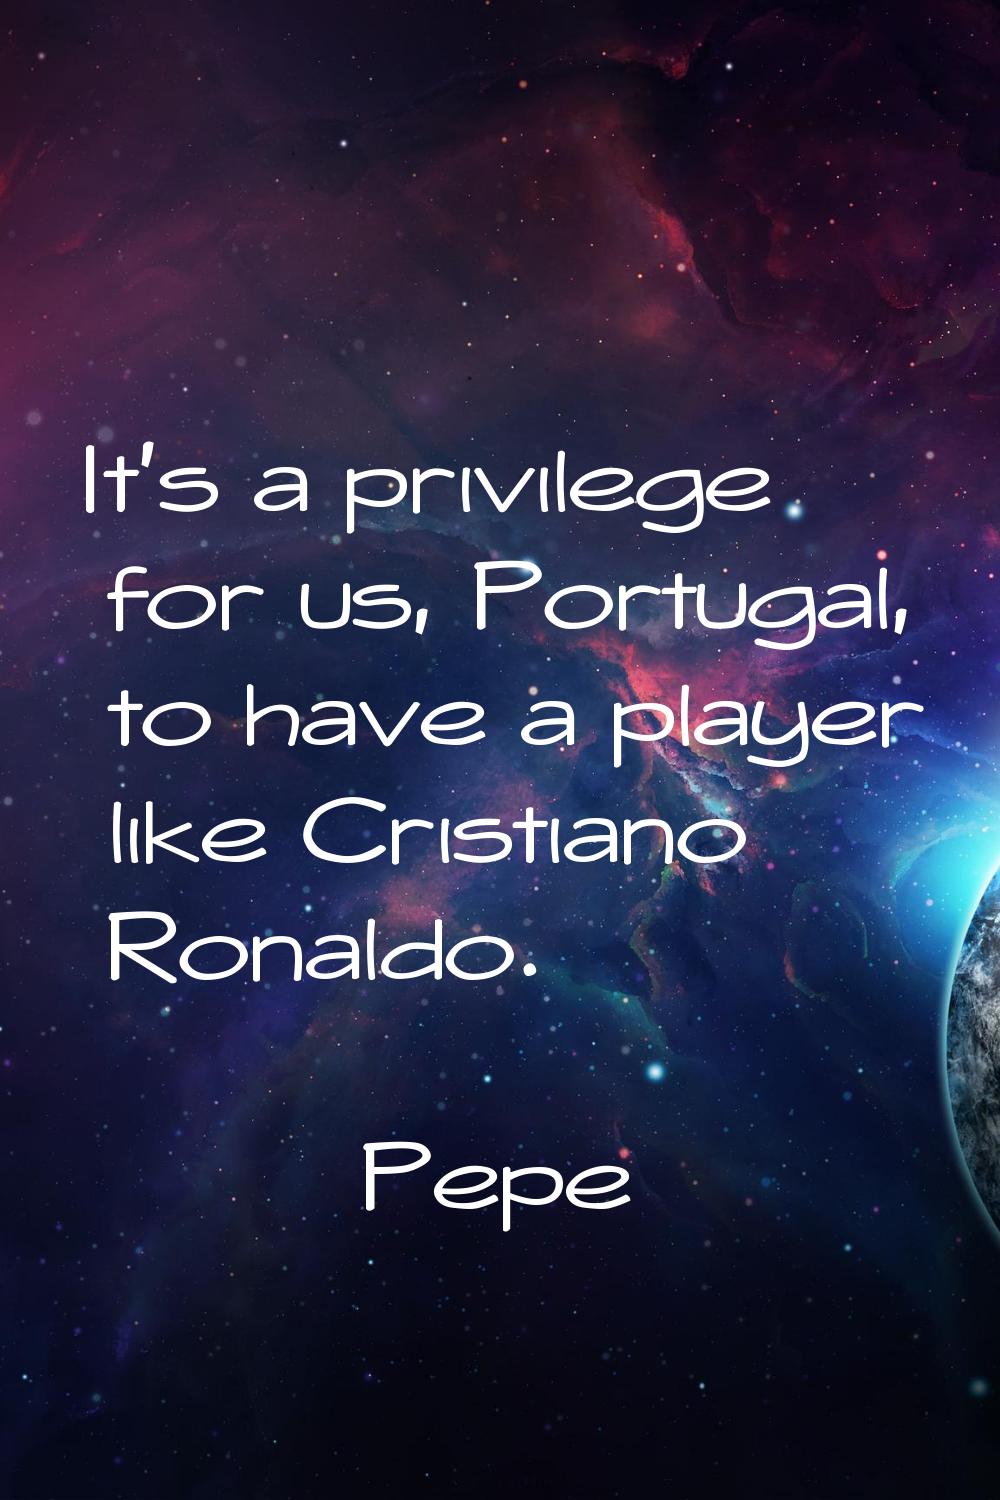 It's a privilege for us, Portugal, to have a player like Cristiano Ronaldo.